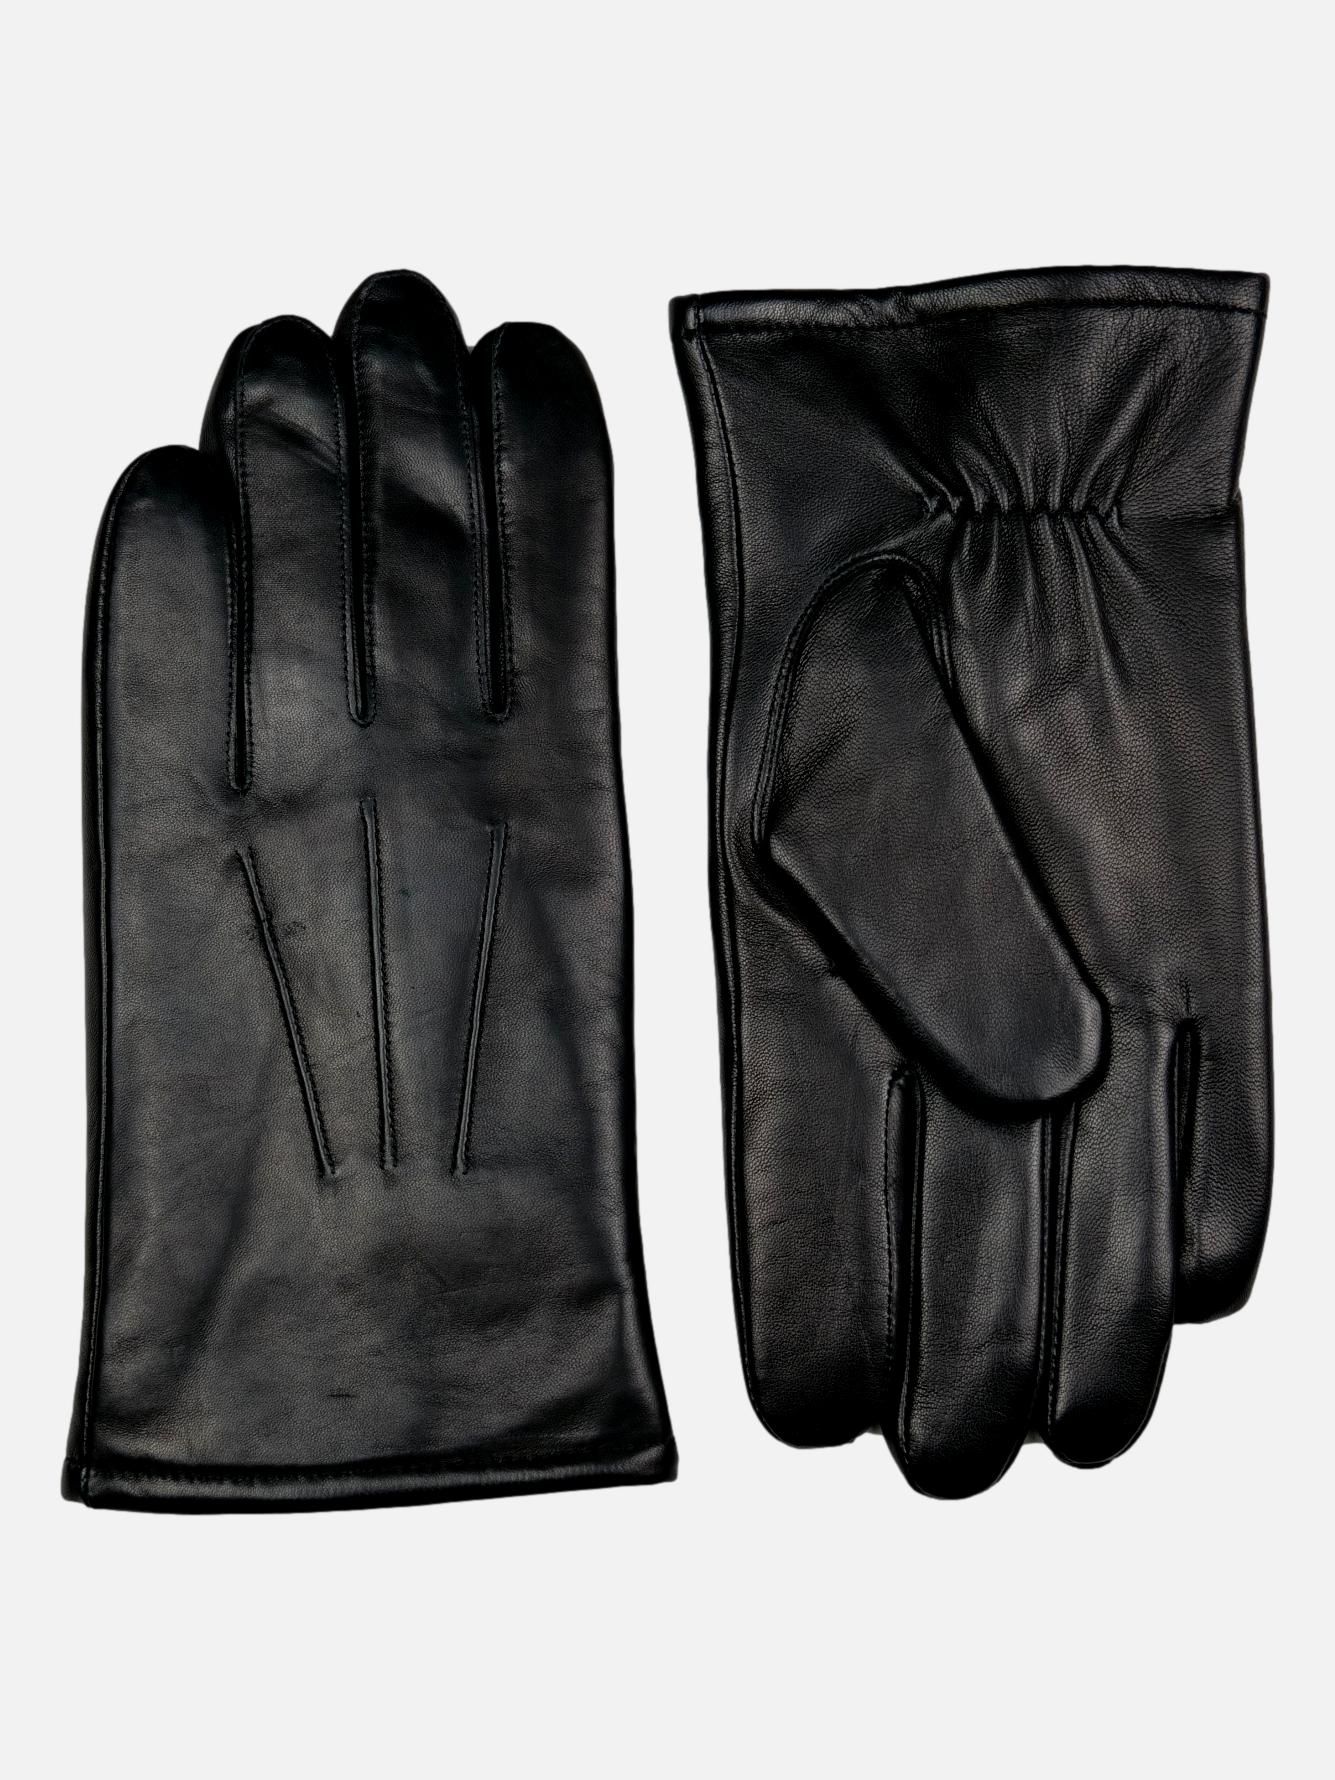 123-M Gloves - Sheep Leather - Accesories - Black